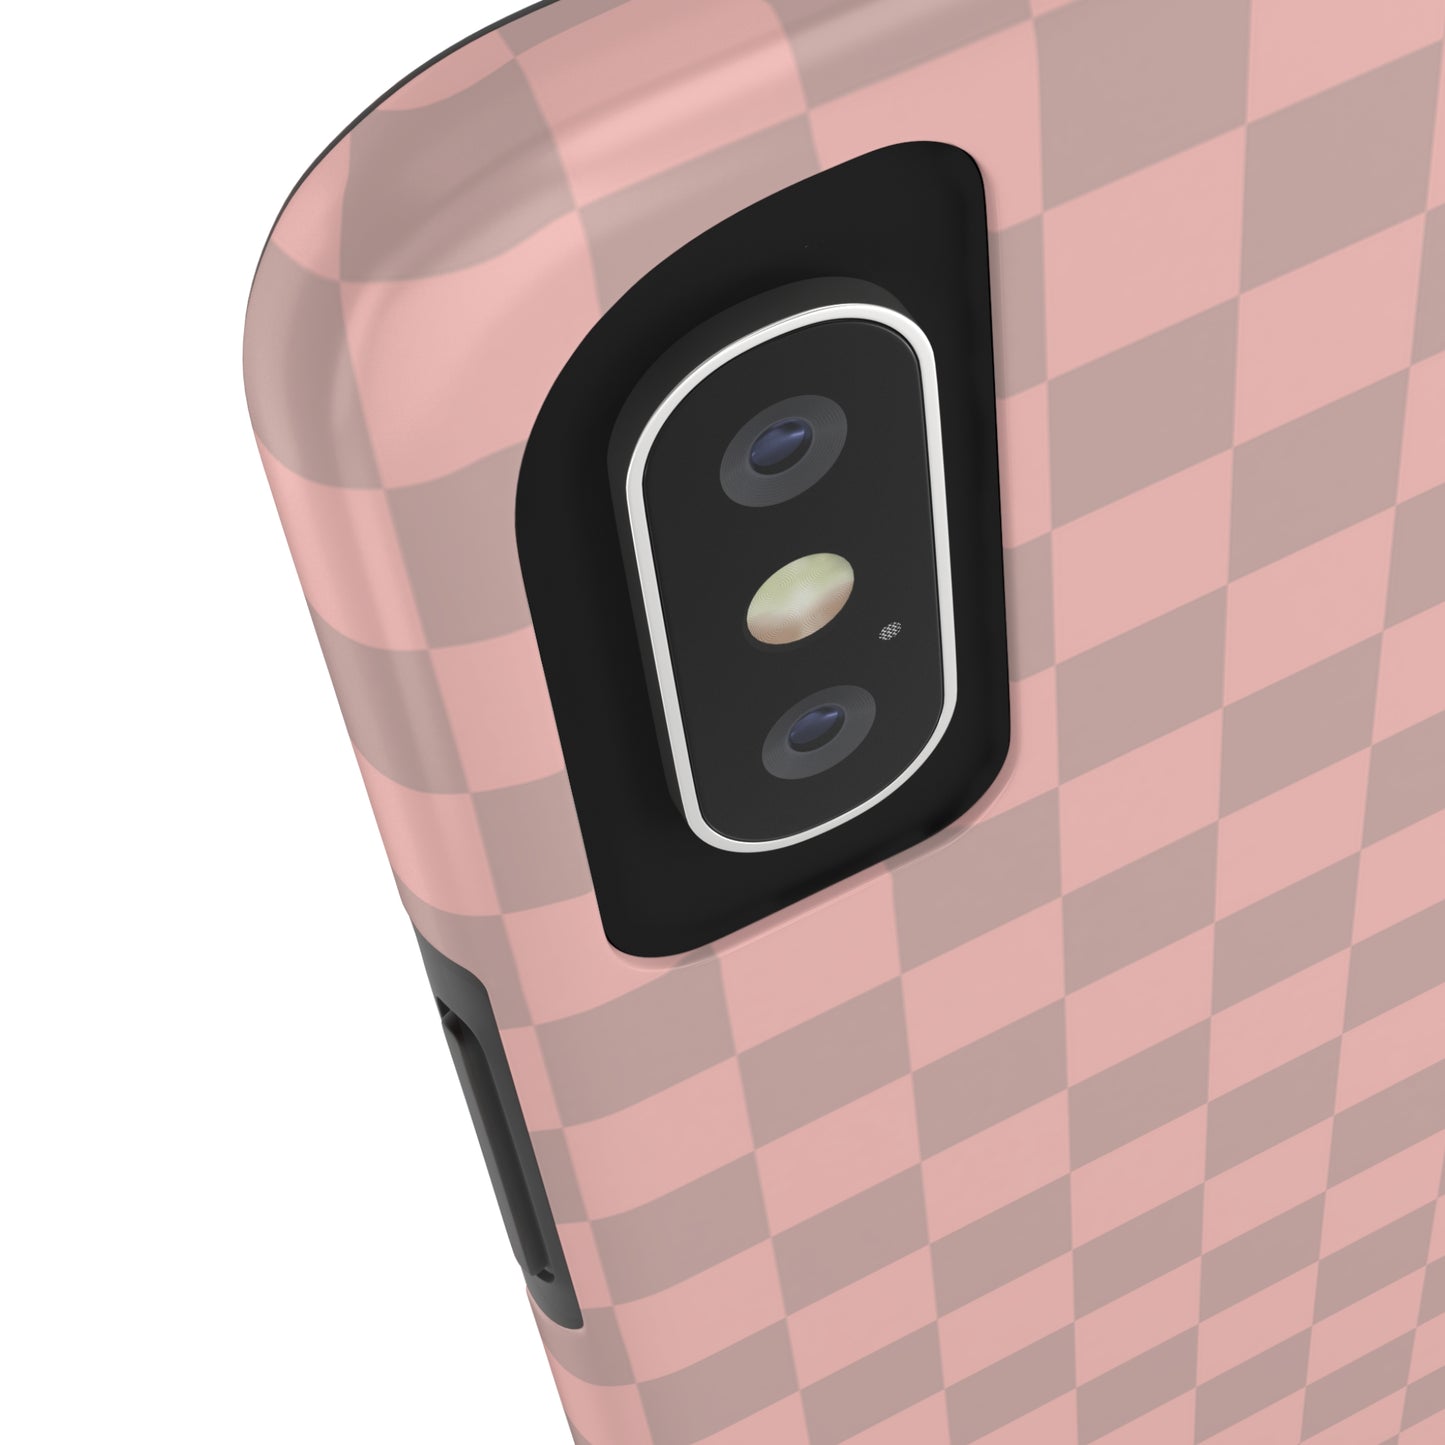 Pale Pink Checkered Tough Phone Cases